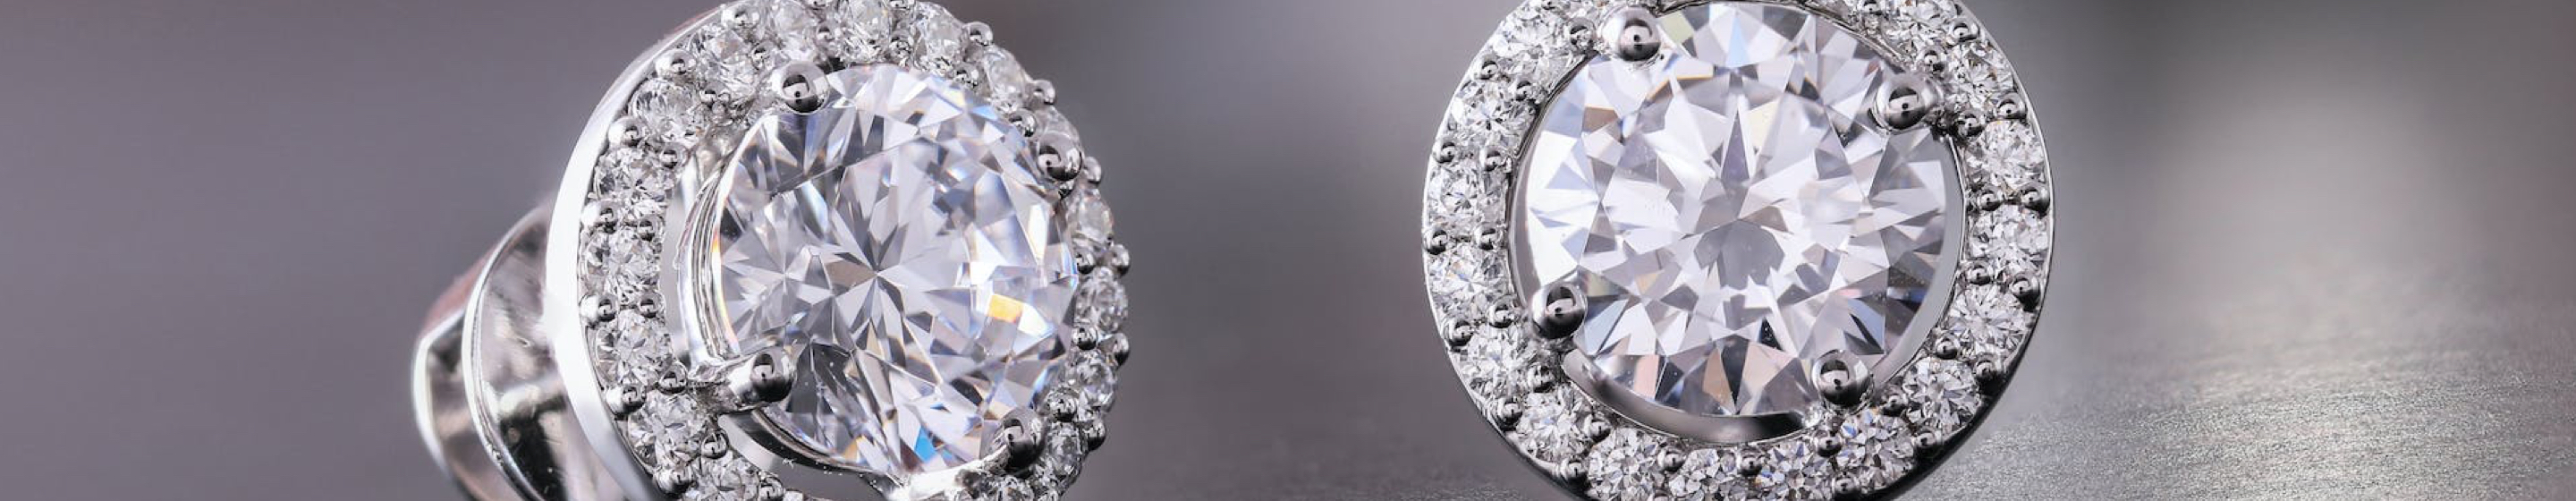 Know Before You Buy - Close-up of Diamonds